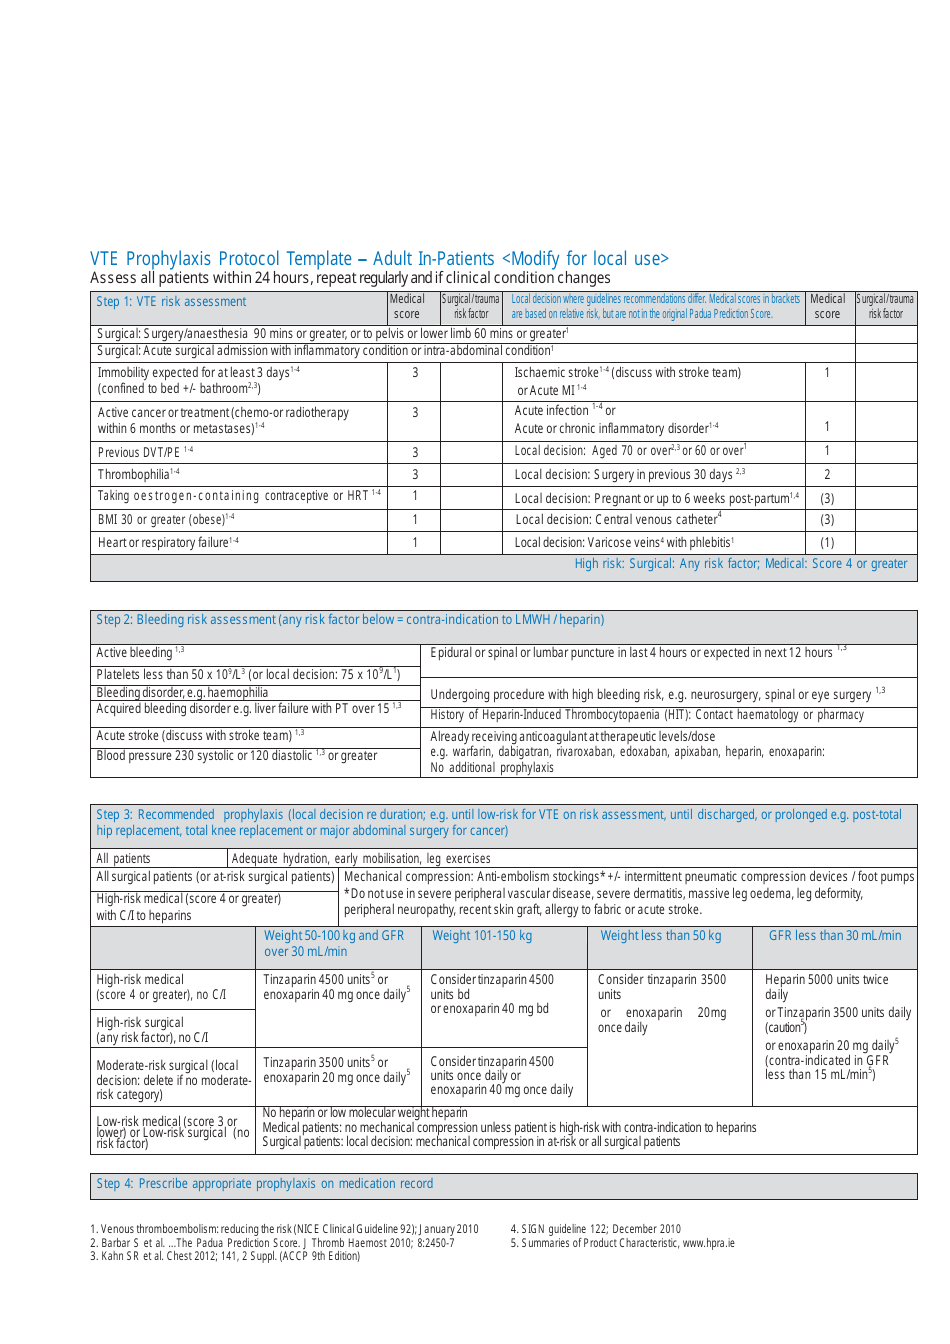 Vte Prophylaxis Protocol Template - Adult in-Patients image preview